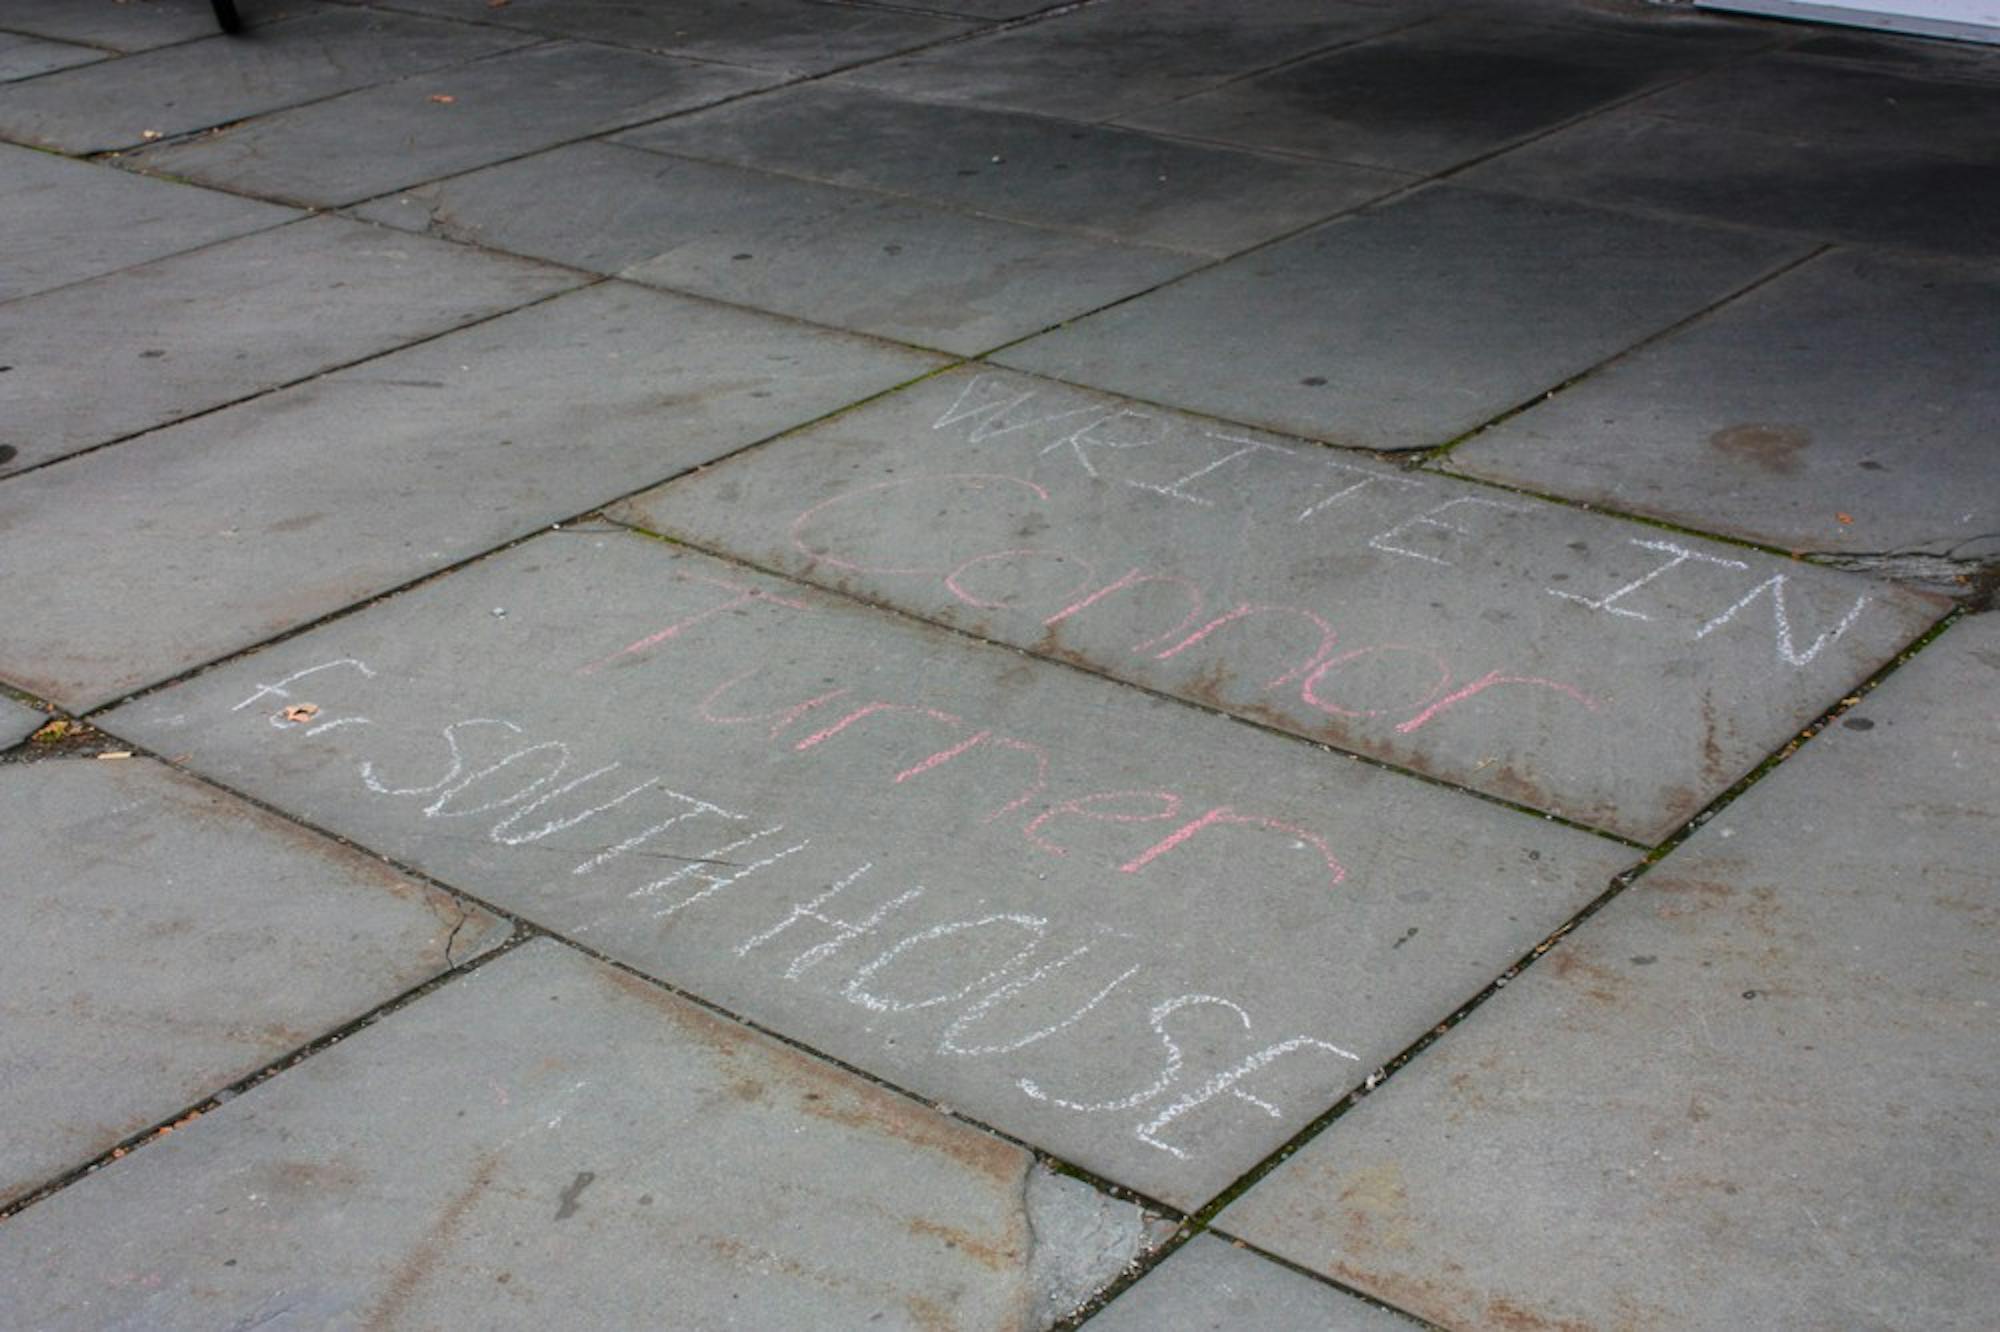 Students wrote campaign messages in chalk outside South House.